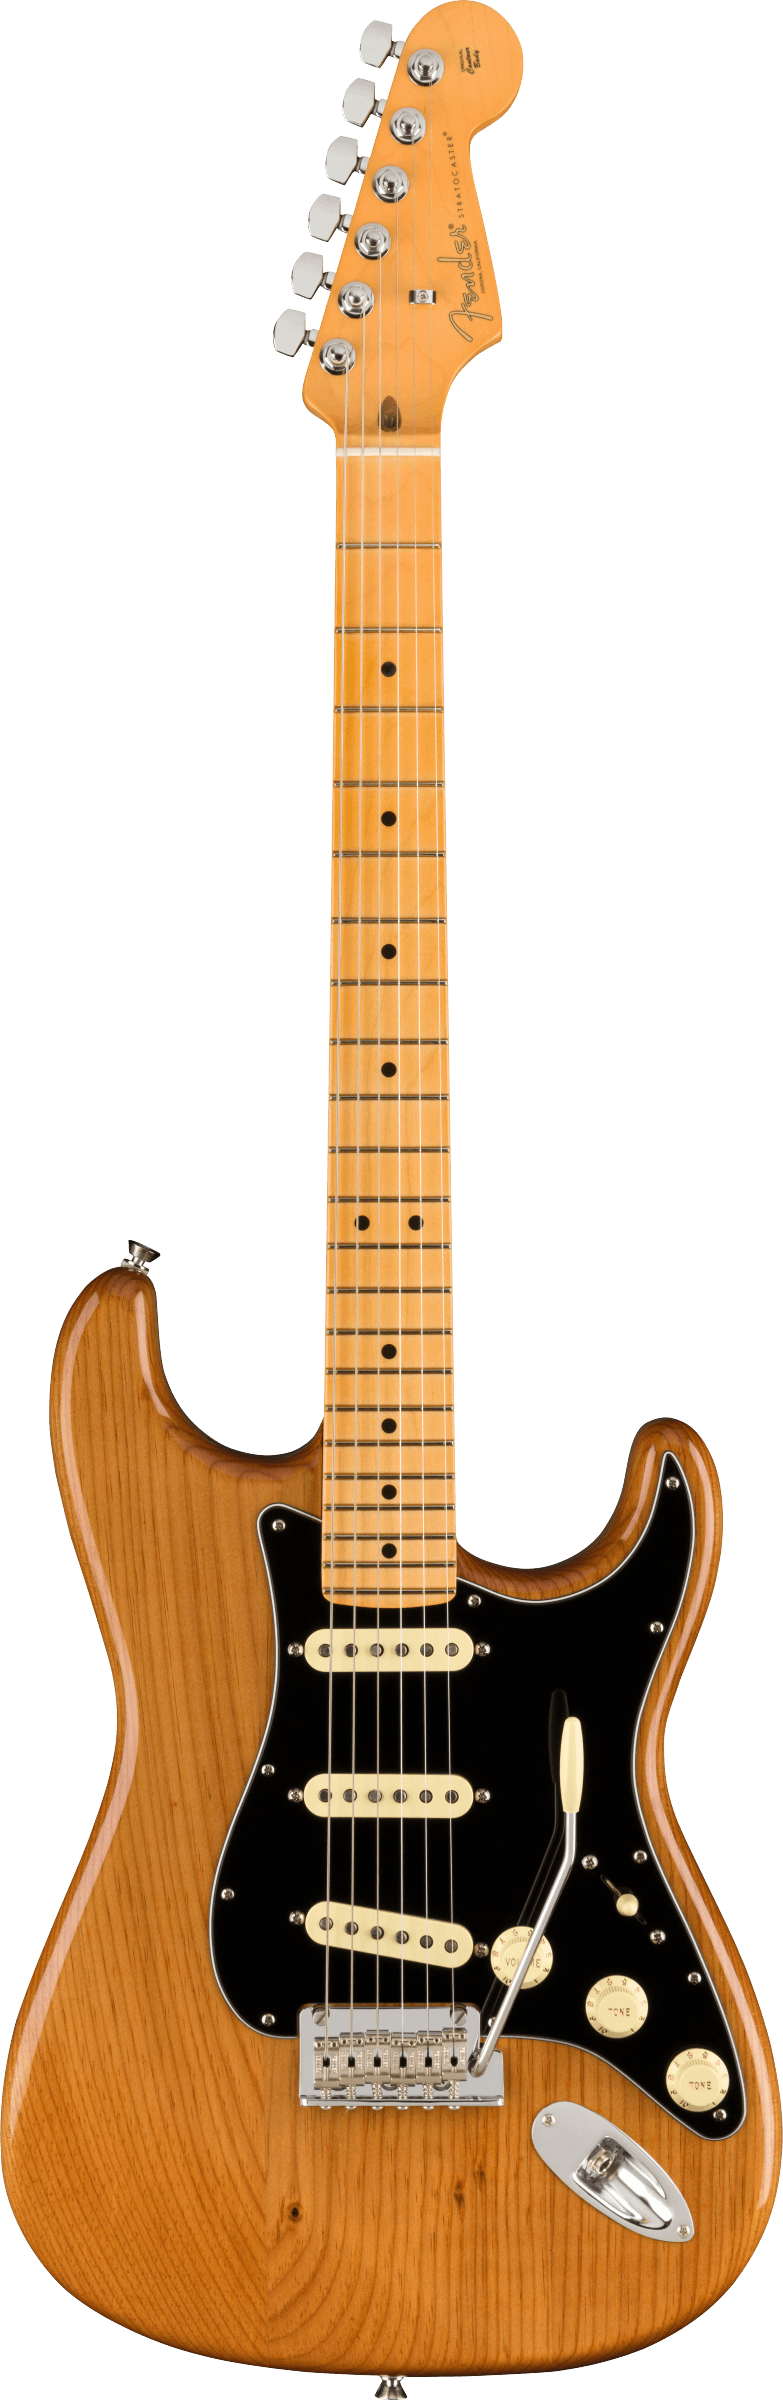 Fender American Professional II Stratocaster - Maple Neck - Roasted Pine